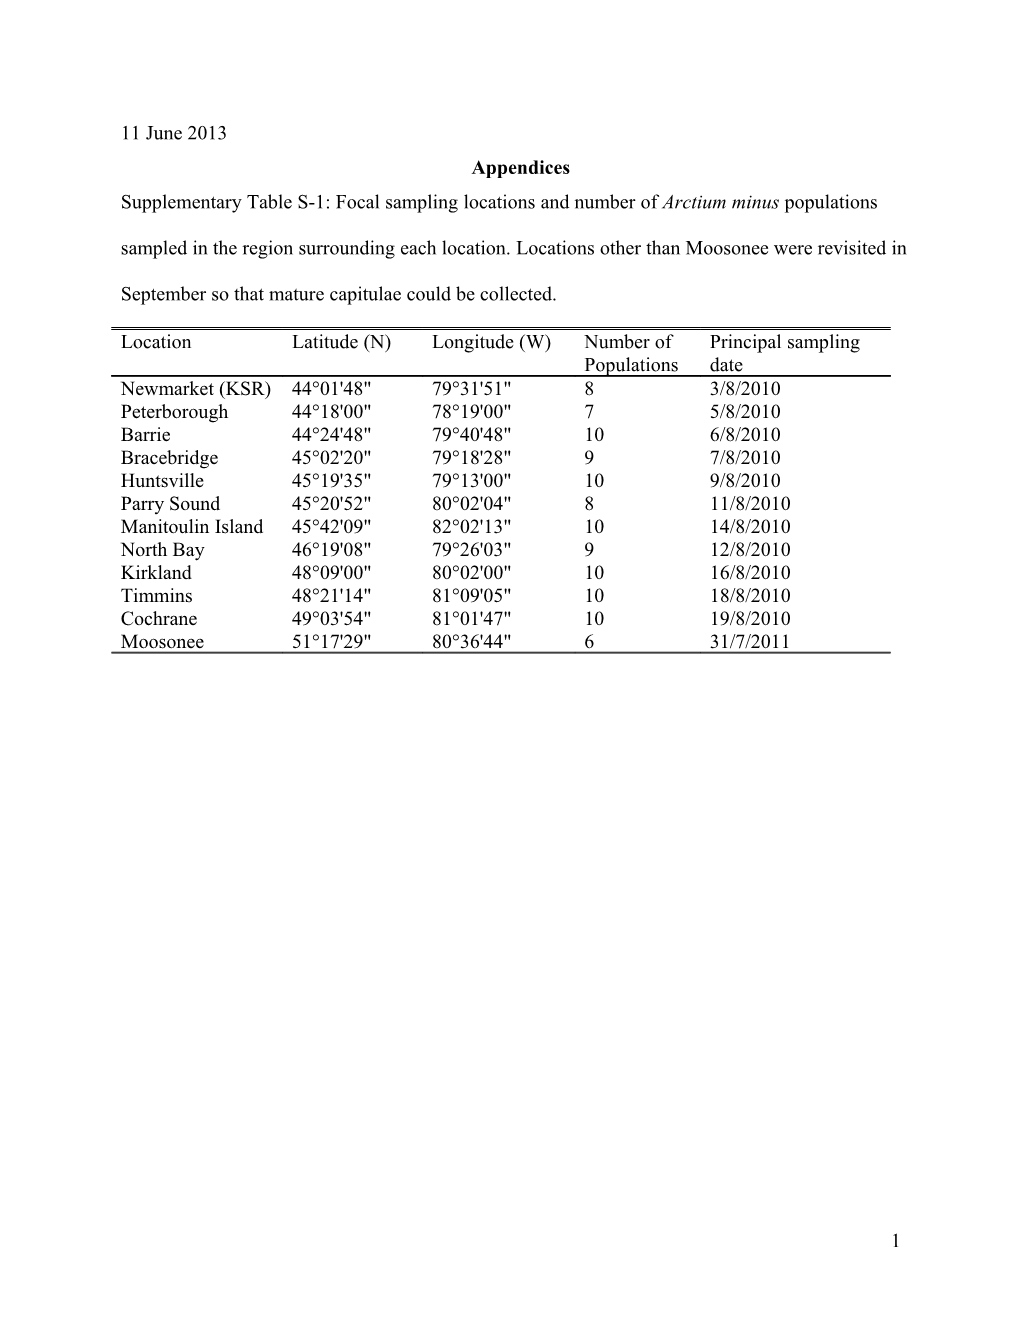 Supplementary Table S-1: Locations and Number of Populations of Sampled